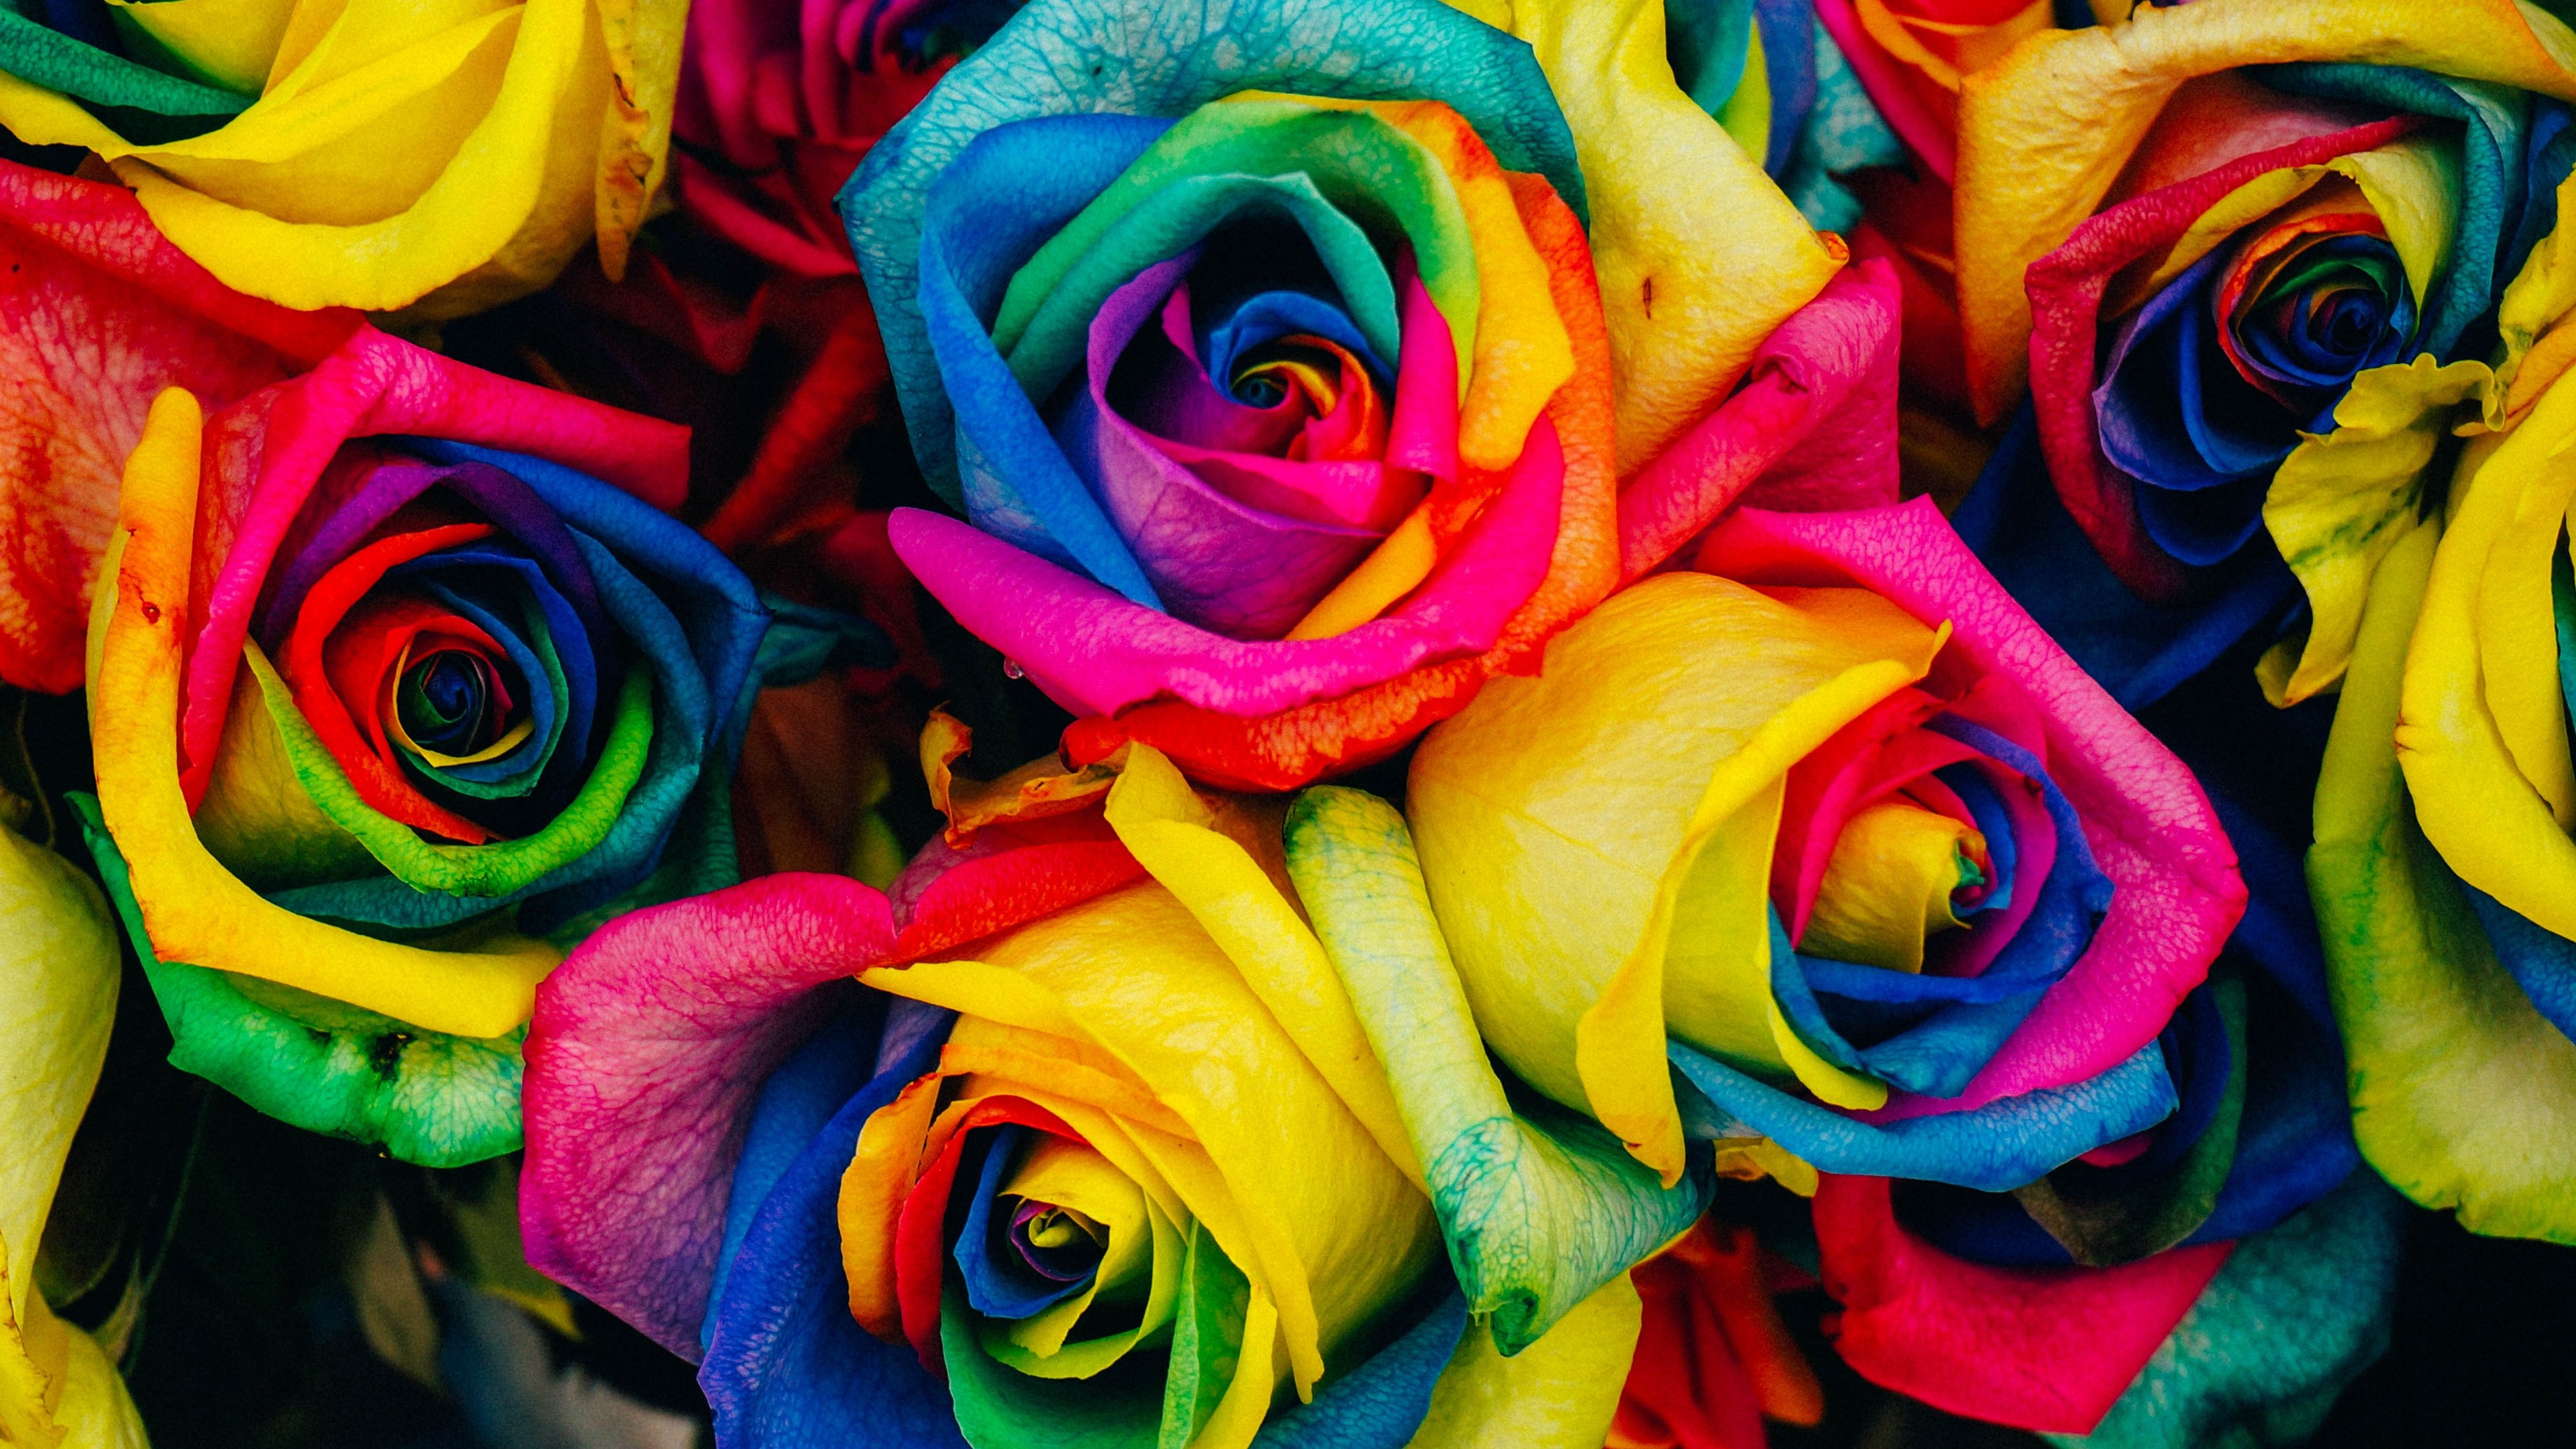 A bouquet of colorful roses - Roses, rainbows